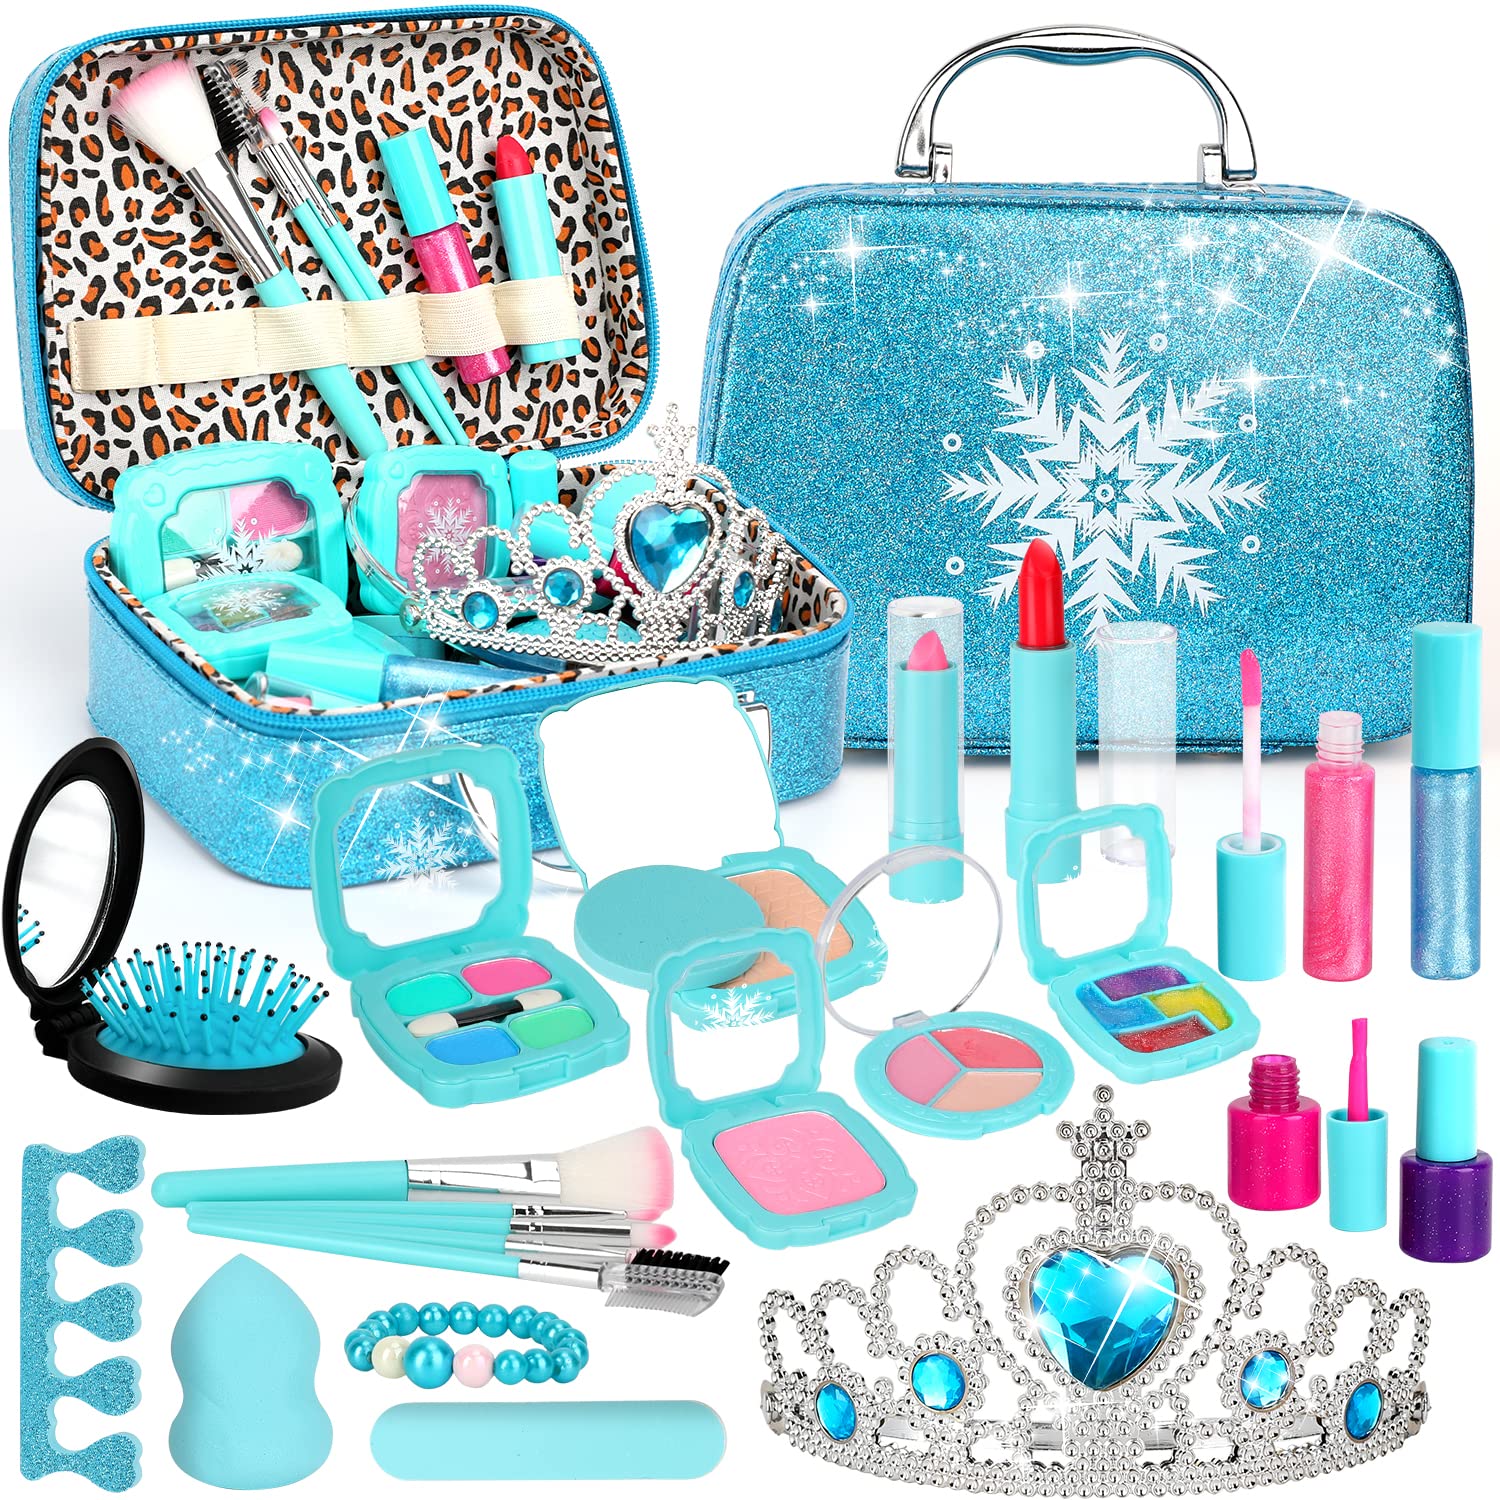 Flybay Kids Makeup Kit for Girl,Washable Real Frozen Make up kit, Girl Toys for 4 5 6 7 8 9 Years Old Girl